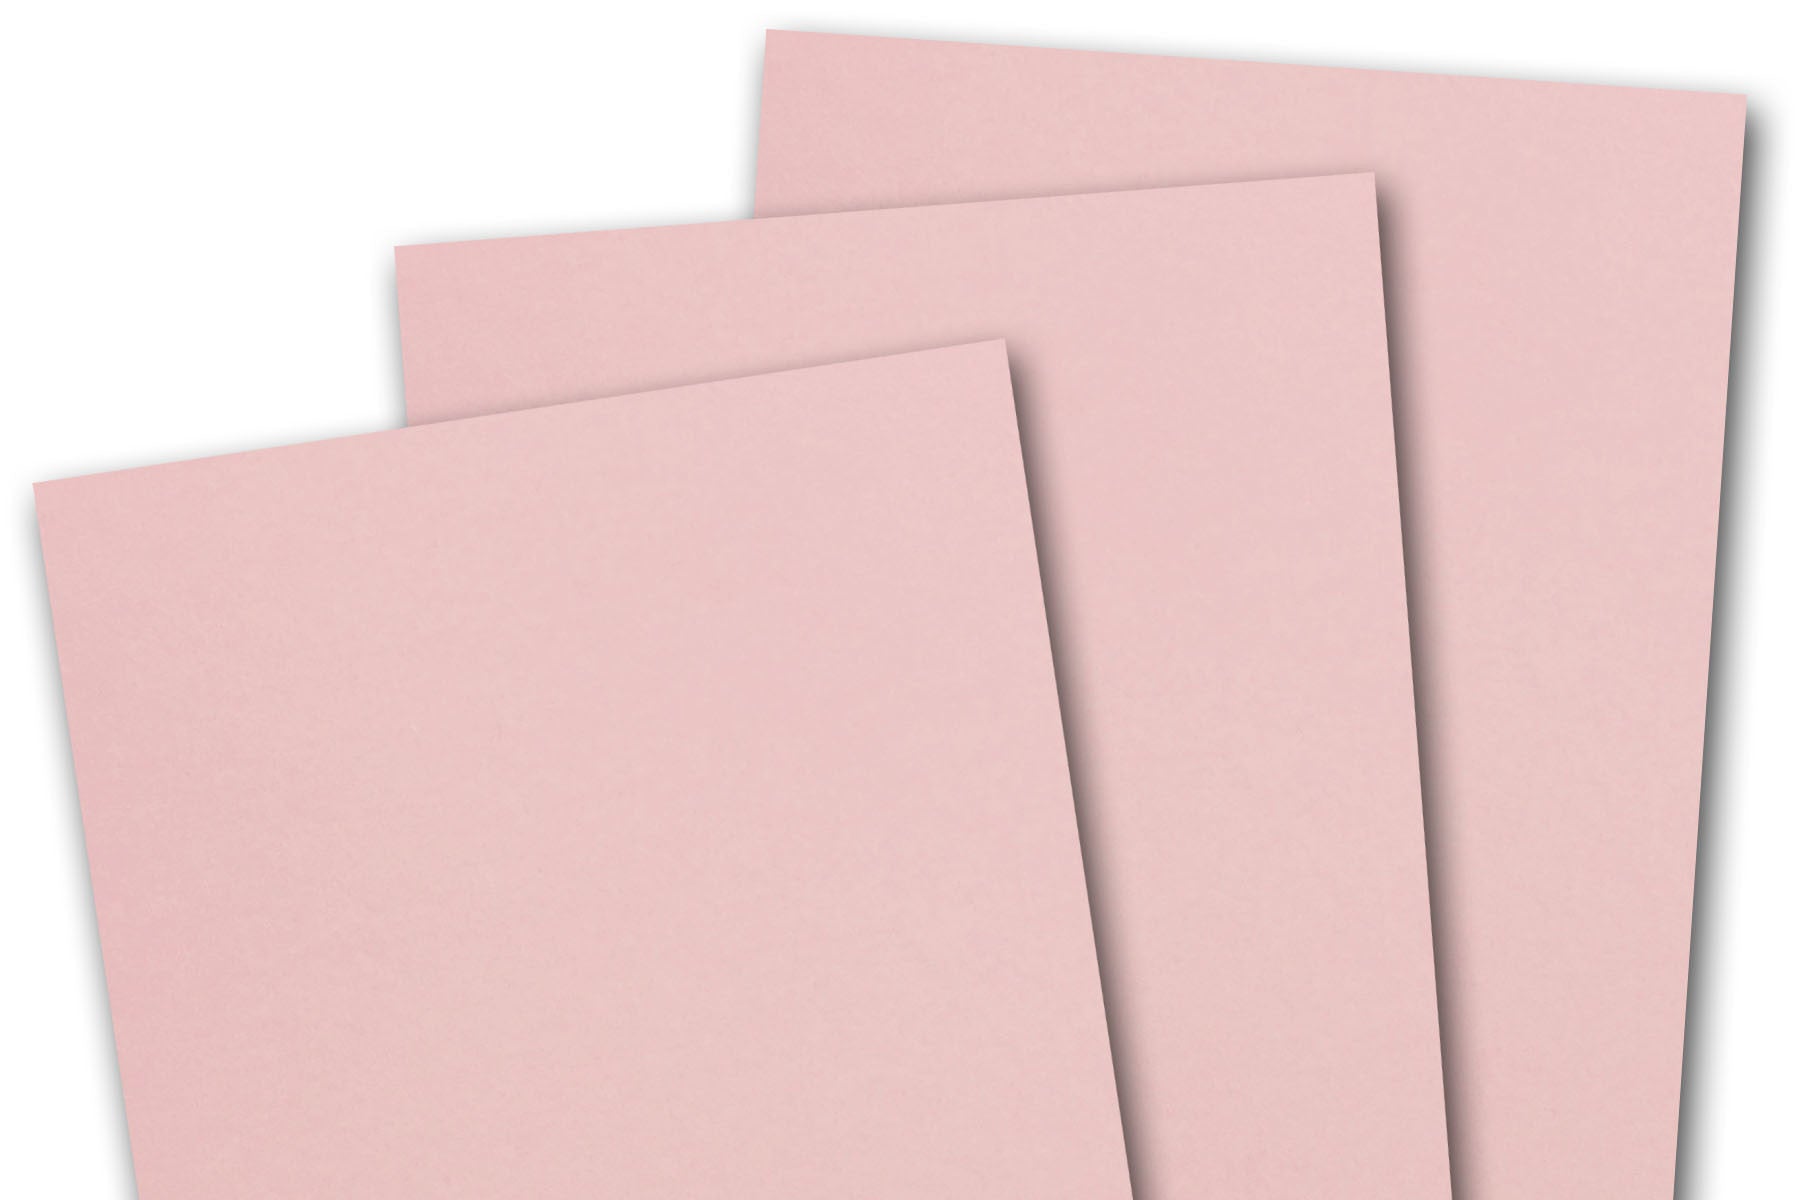 Basic BRIGHT PINK Card Stock Paper - 8.5 x 11 - 100lb Cover (270gsm) - 100